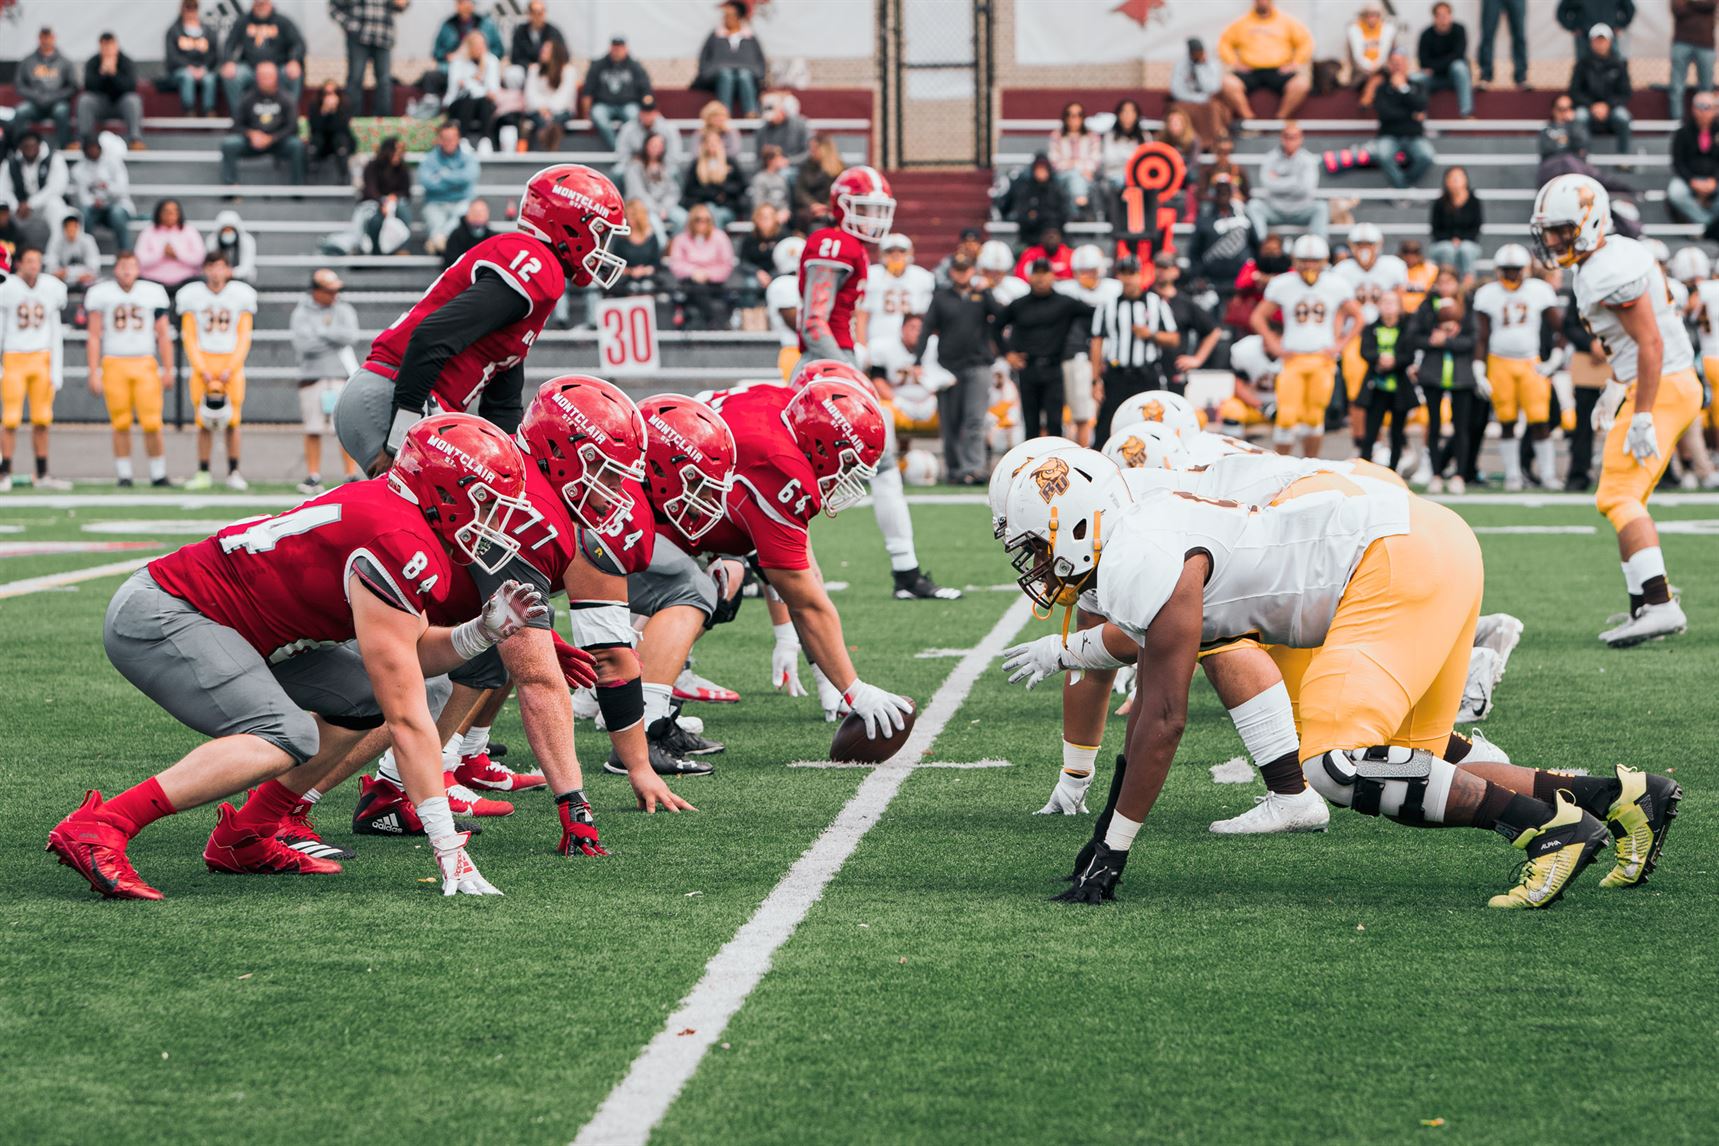 The Red Hawks totaled nearly 400 yards of offense against Rowan University. Kevin Murrugarra | The Montclarion